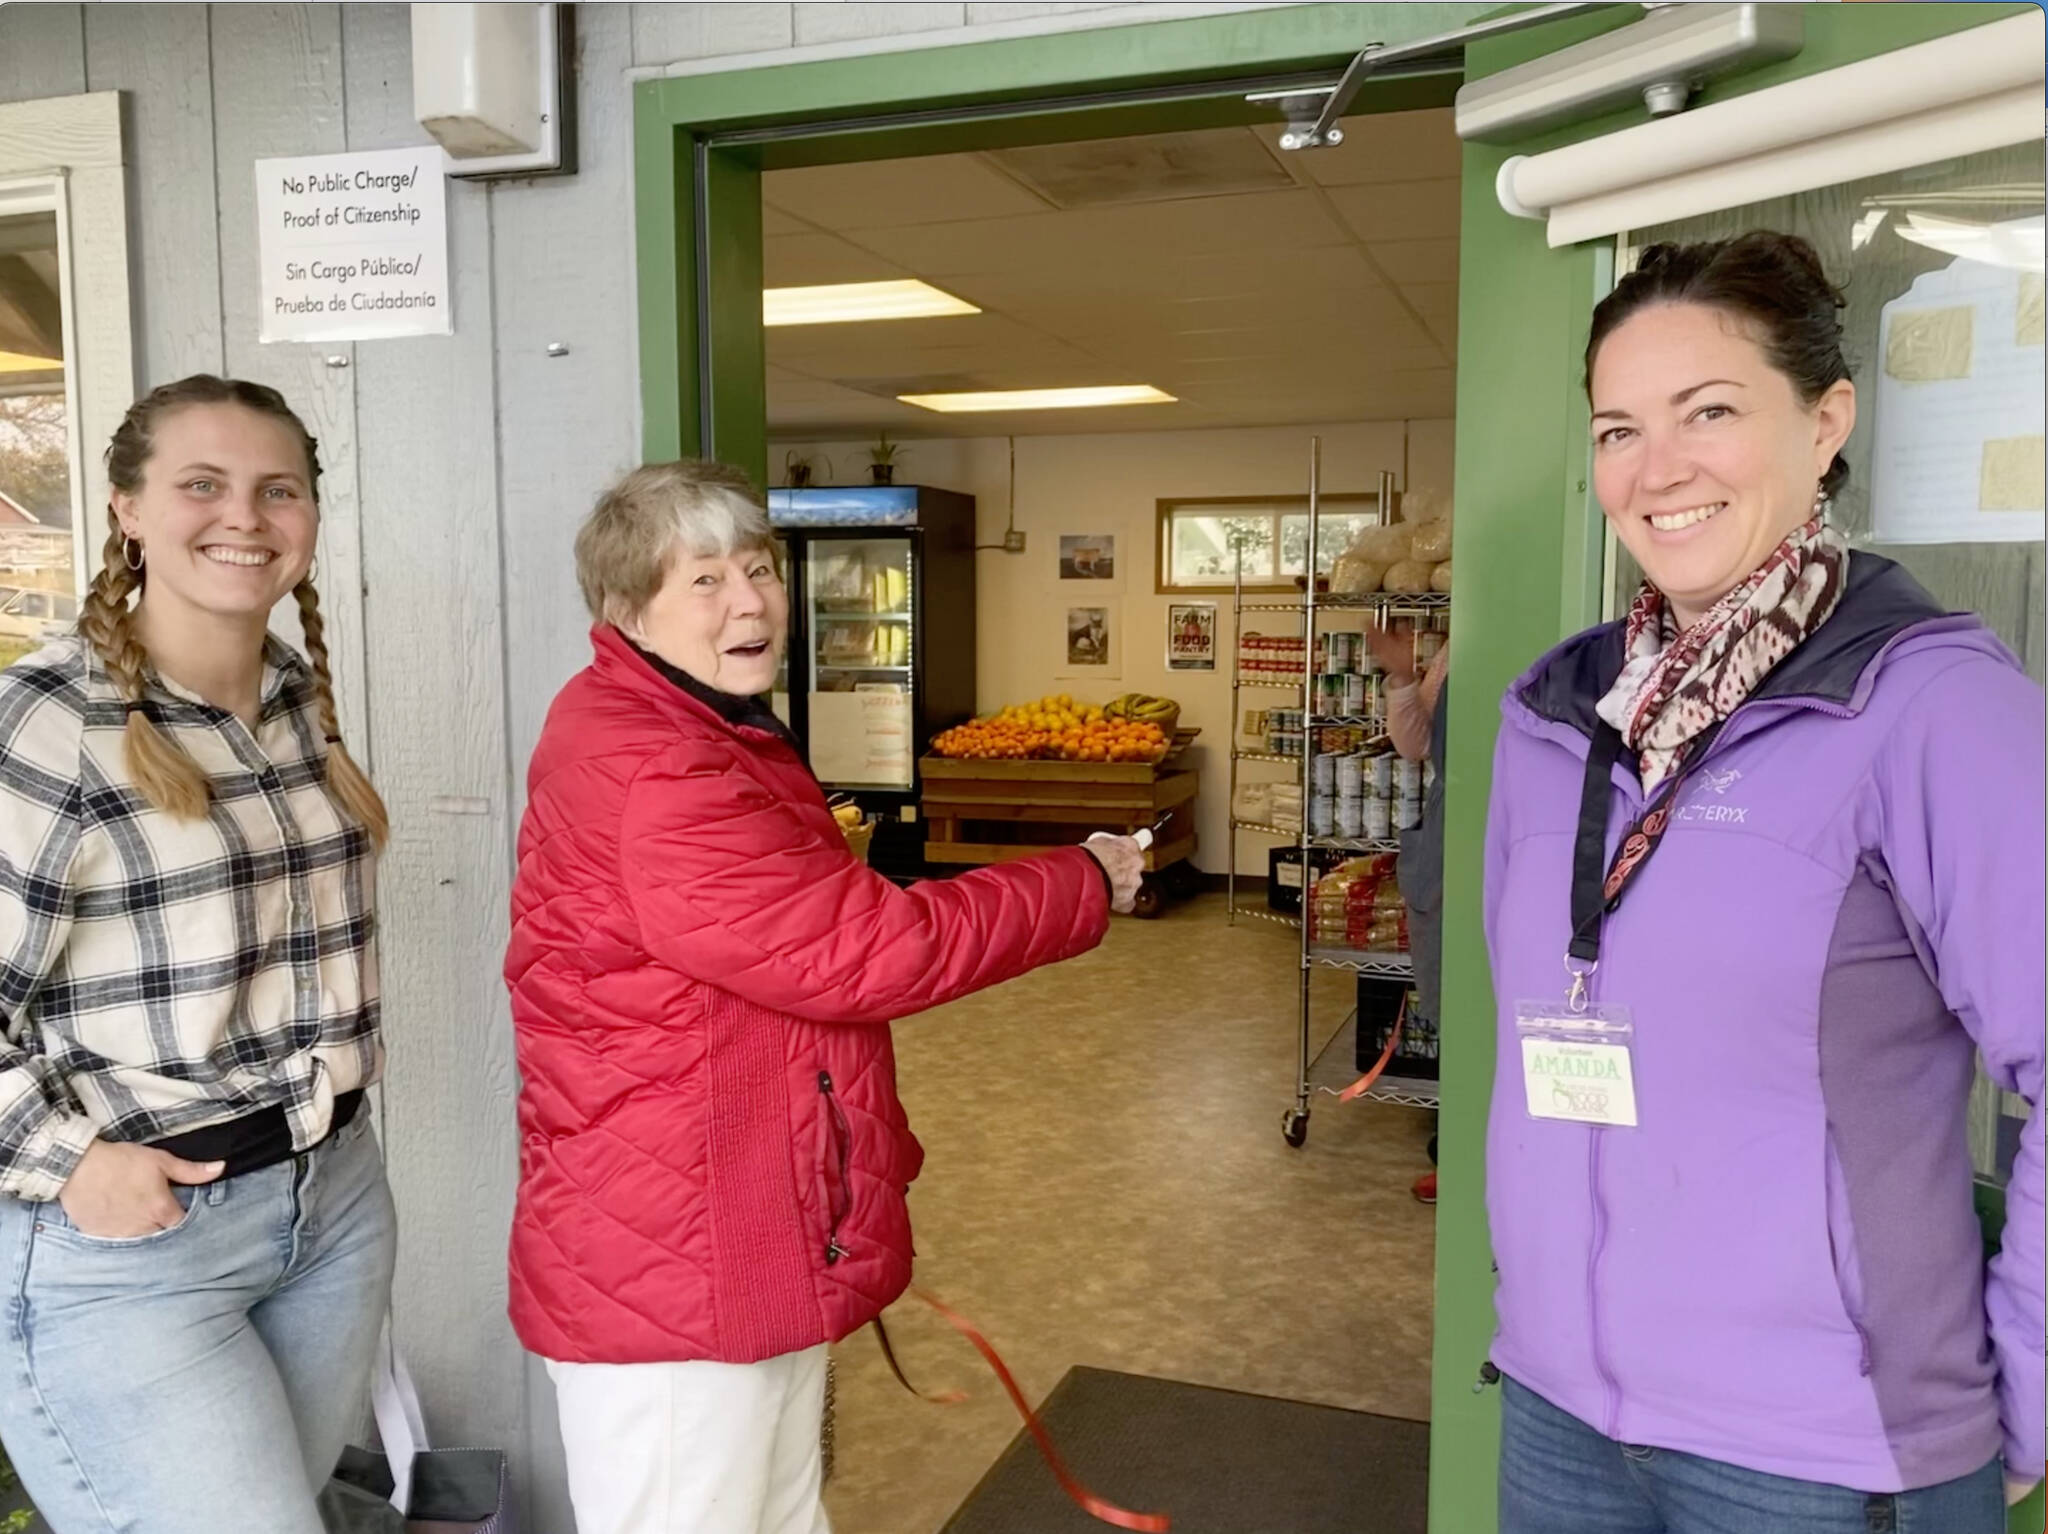 Rick Rhodes photo.
Carolyn Carroll cuts the ribbon and becomes the first customer to experience full self-service at the Orcas Island Food Bank with (left) Operations Manager Alison O’Toole and Executive Director Amanda Sparks (right).